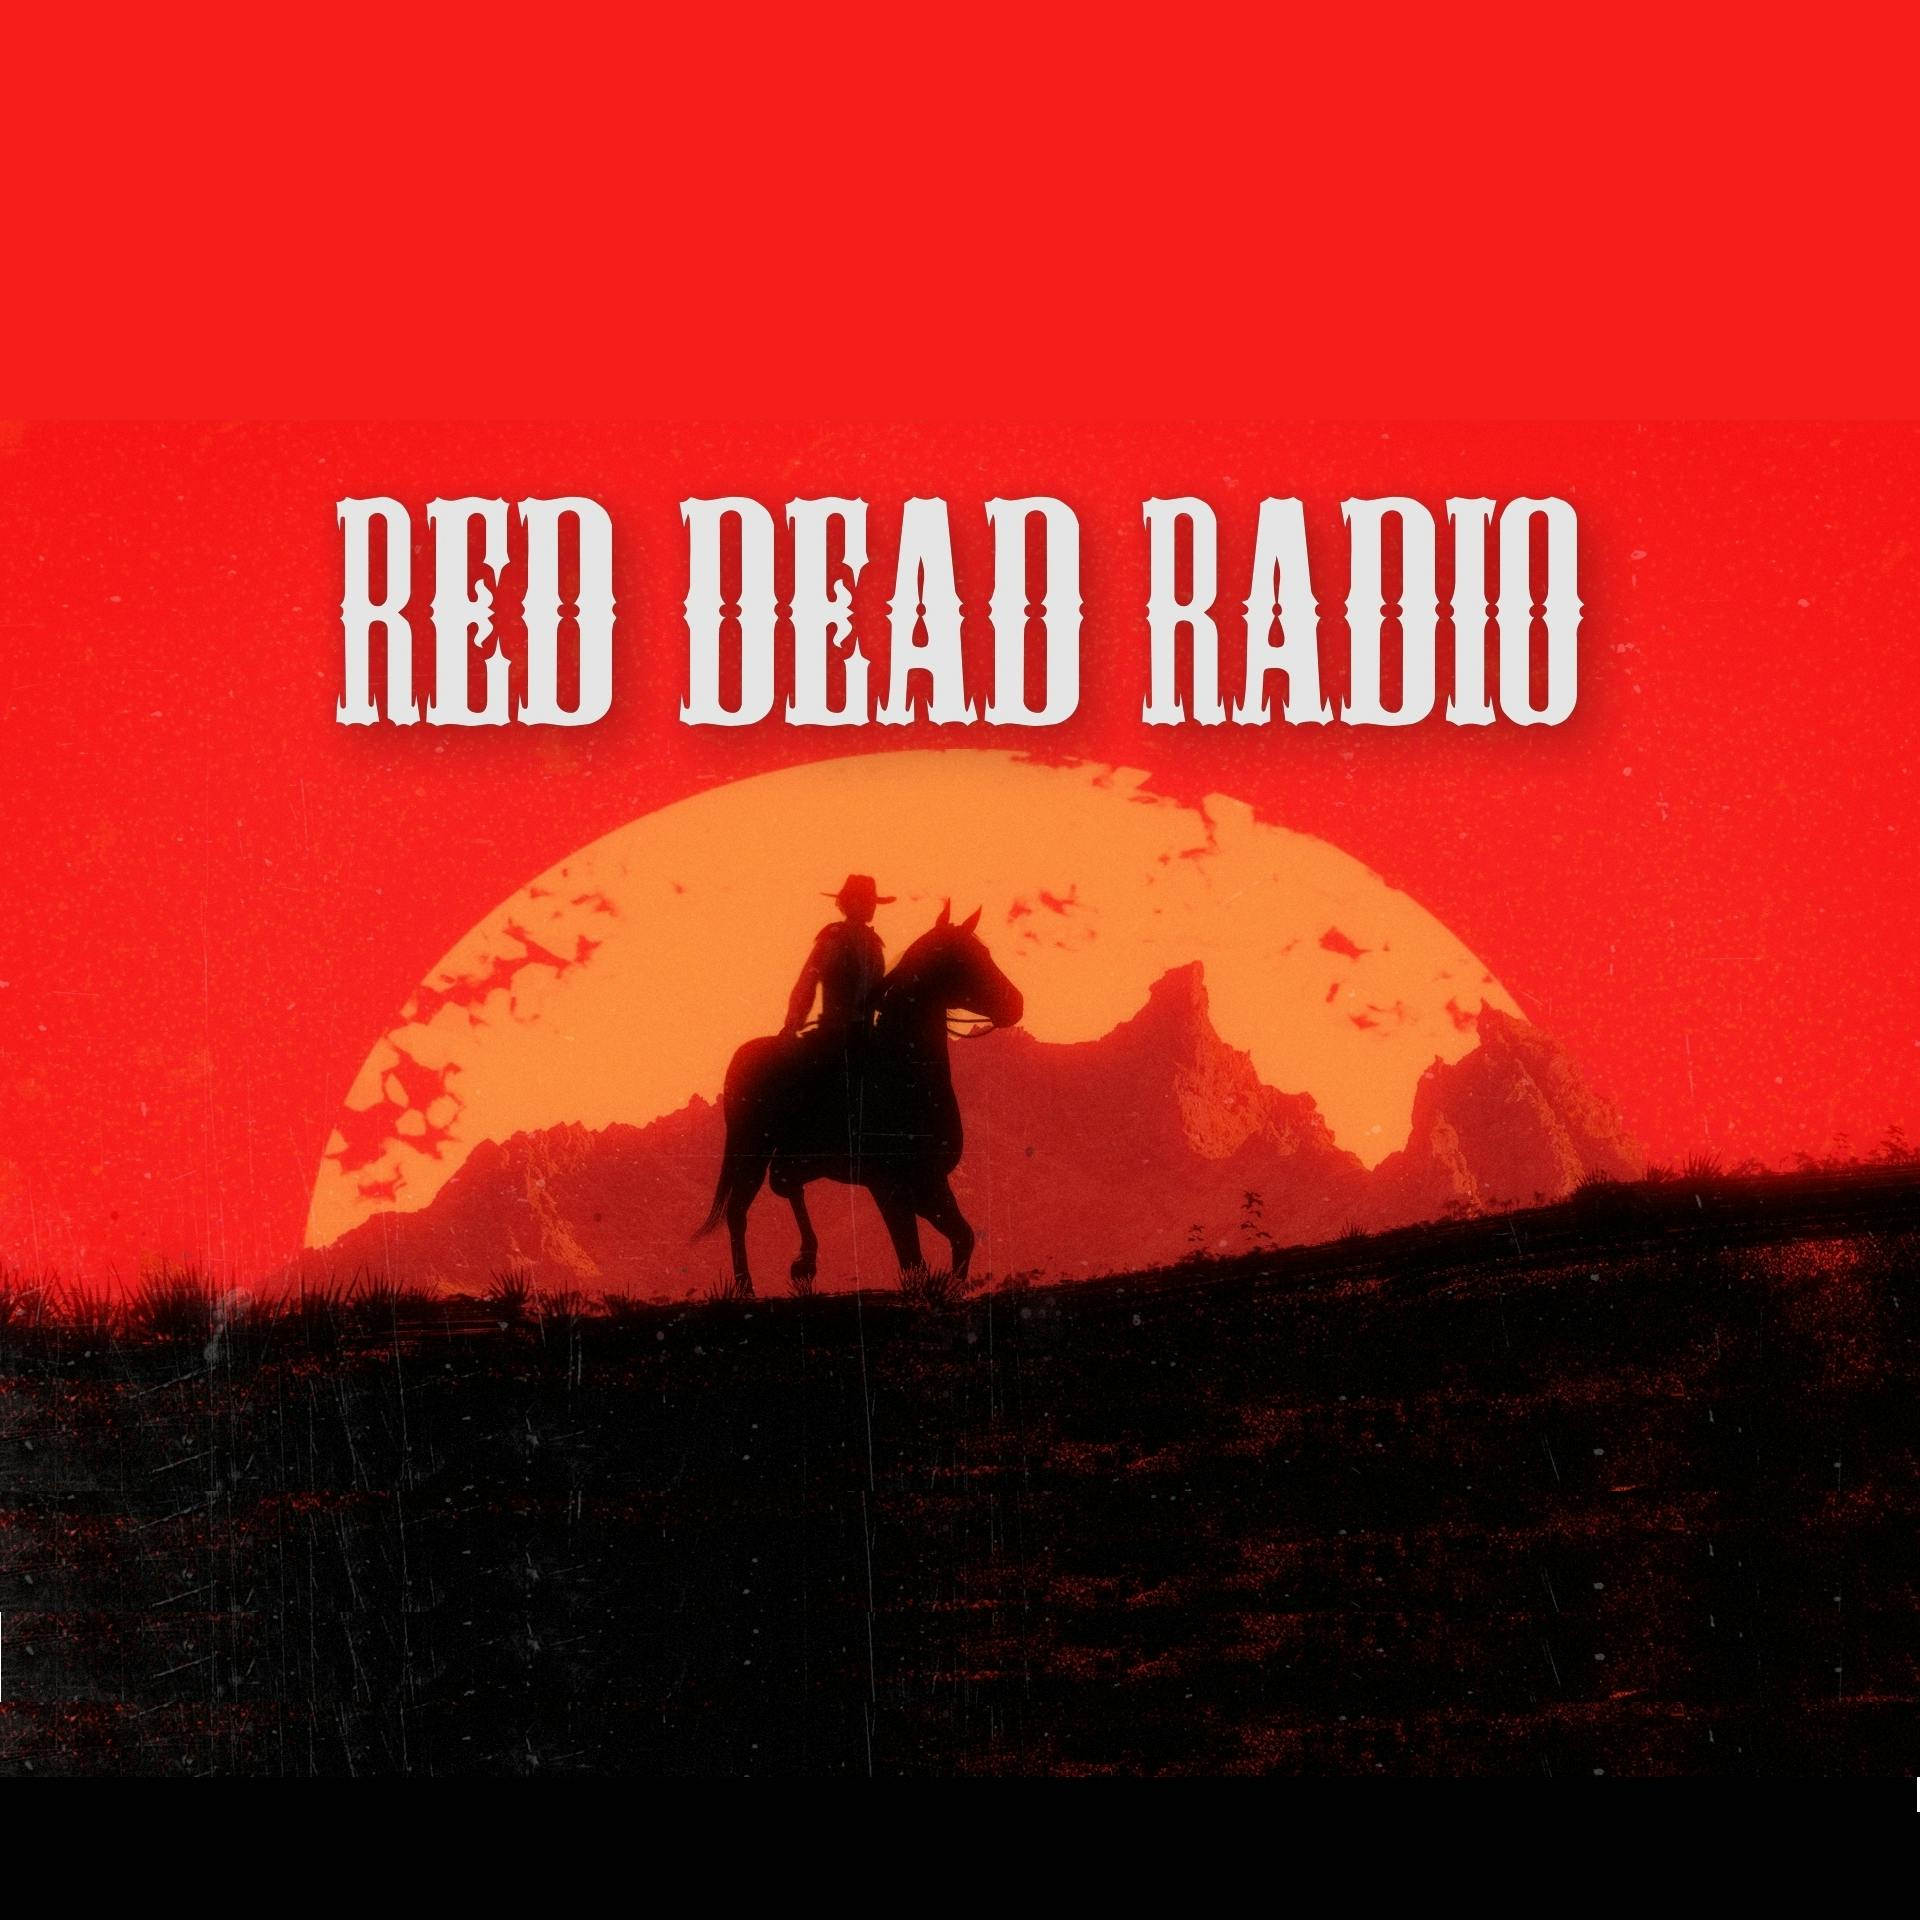 The Red Dead Redemption 2 Spoilercast: Red Dead Radio Ep. 32